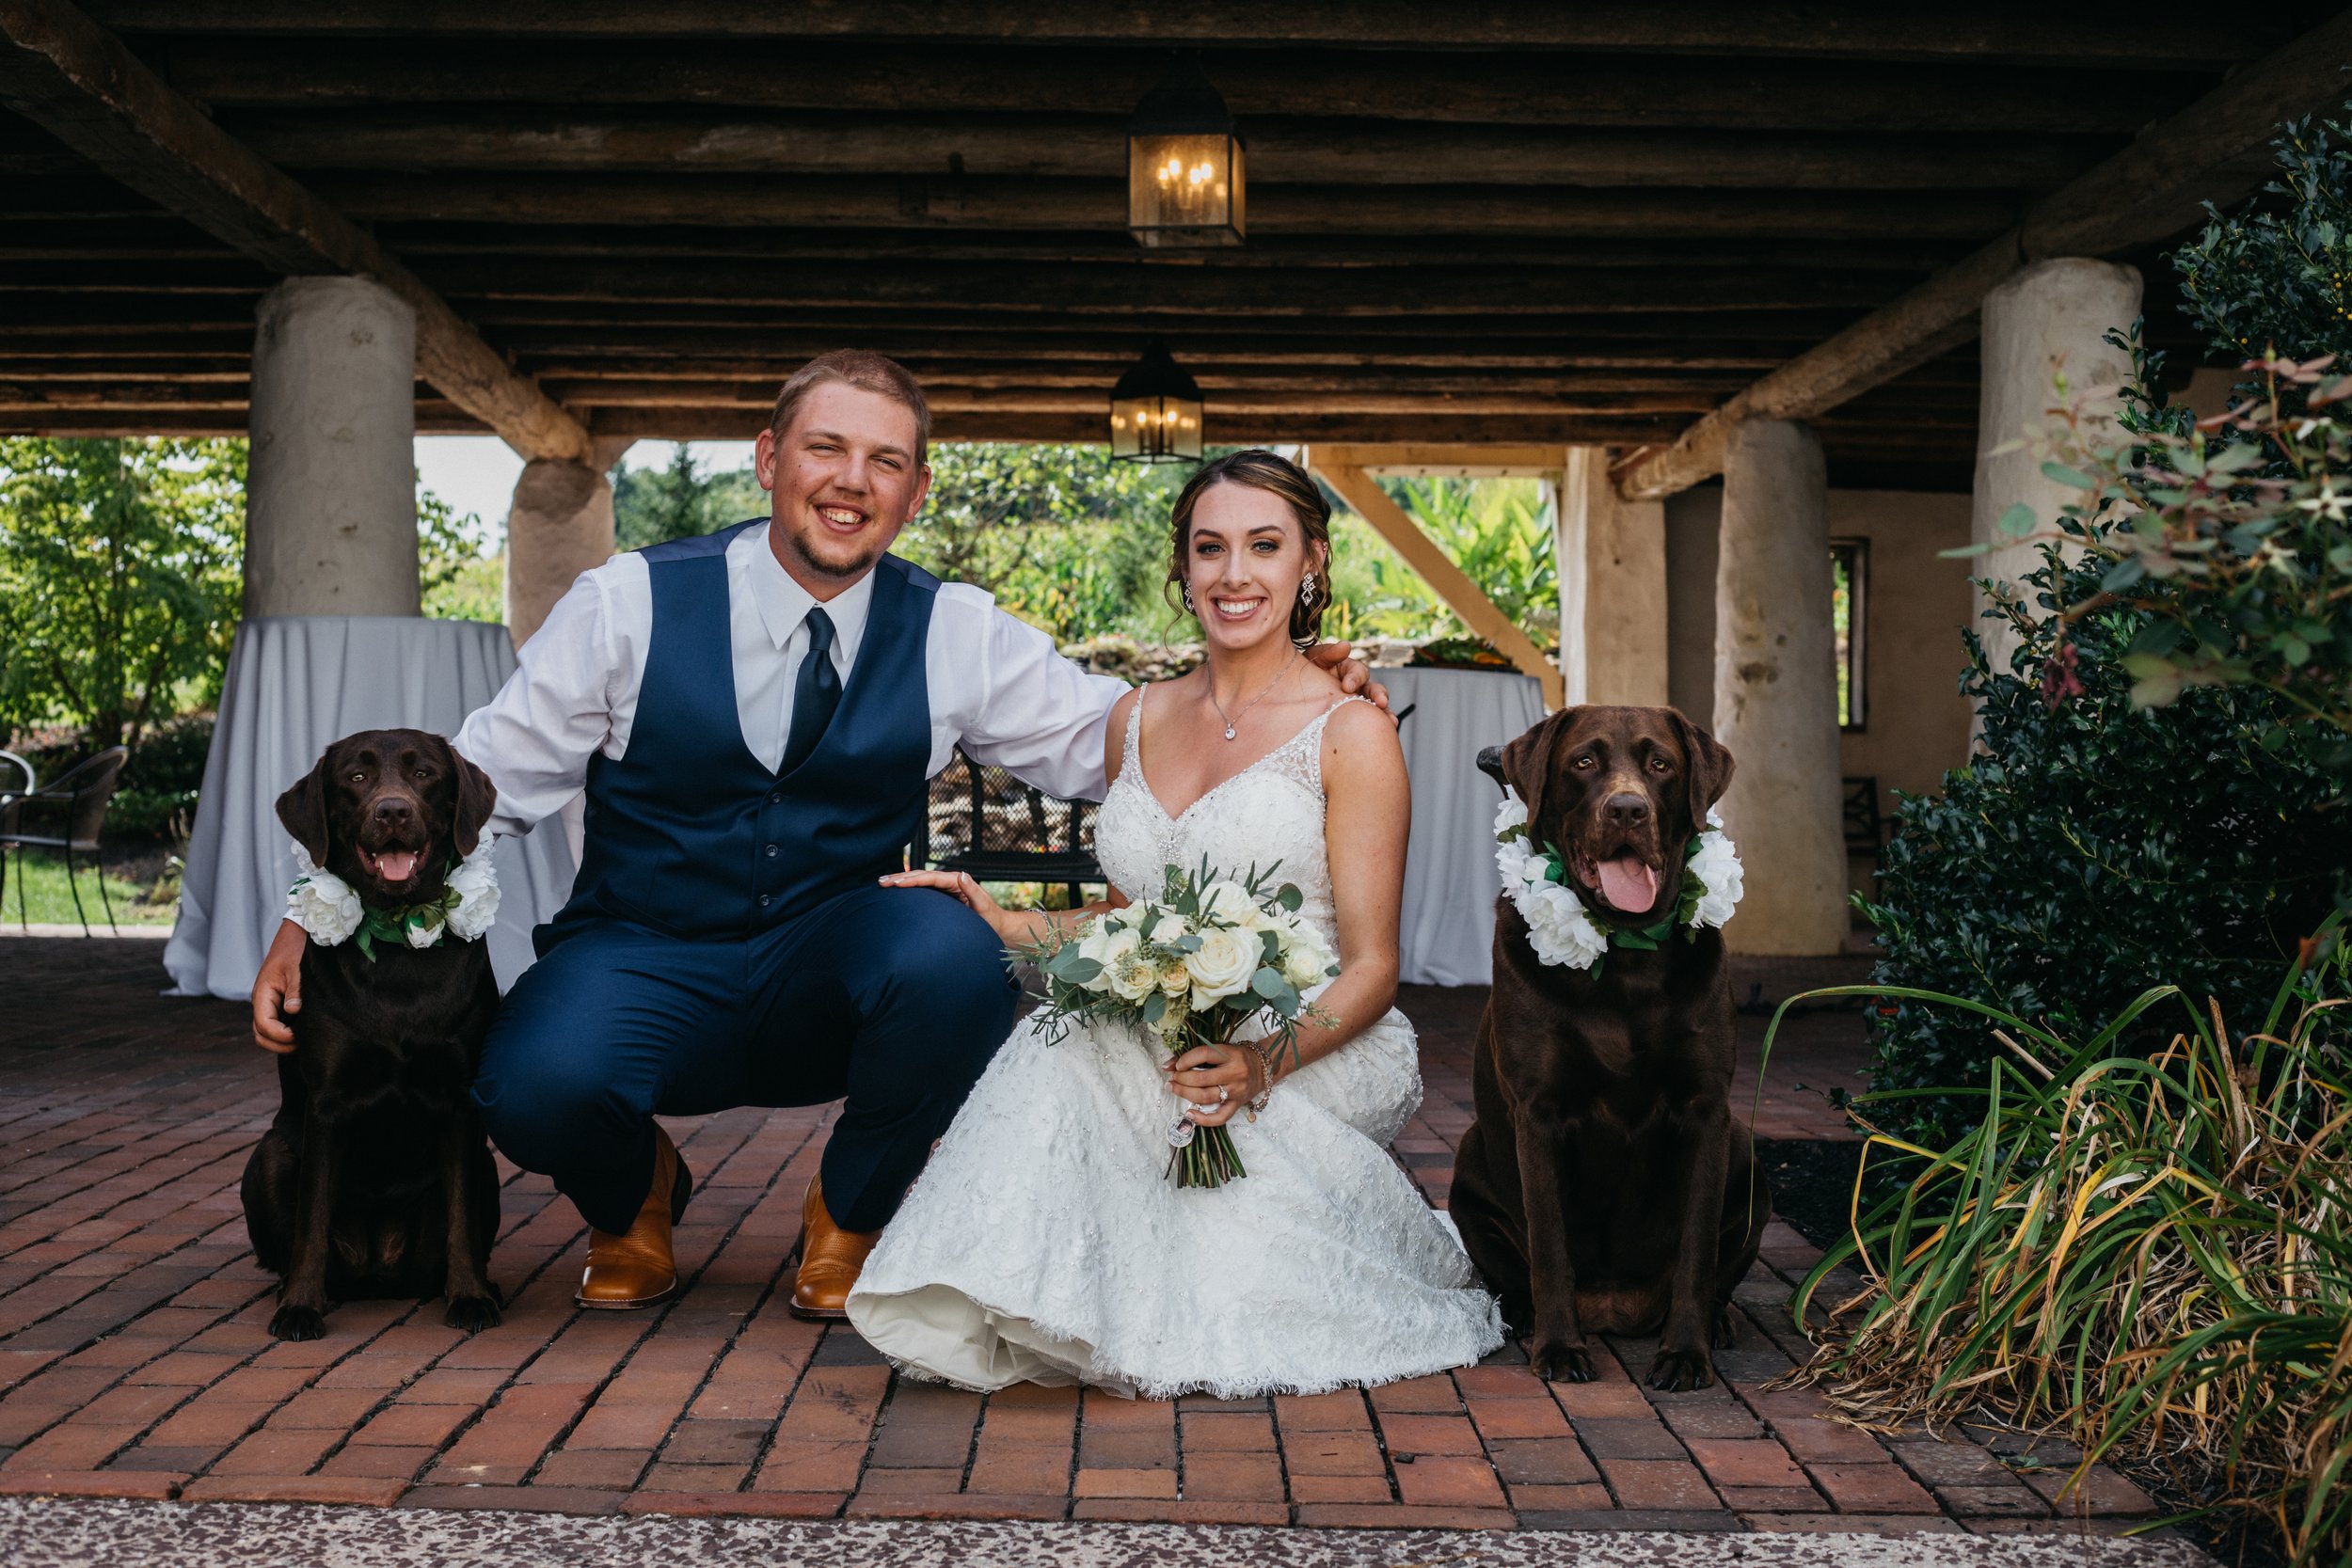 A bride and groom with her two dogs.